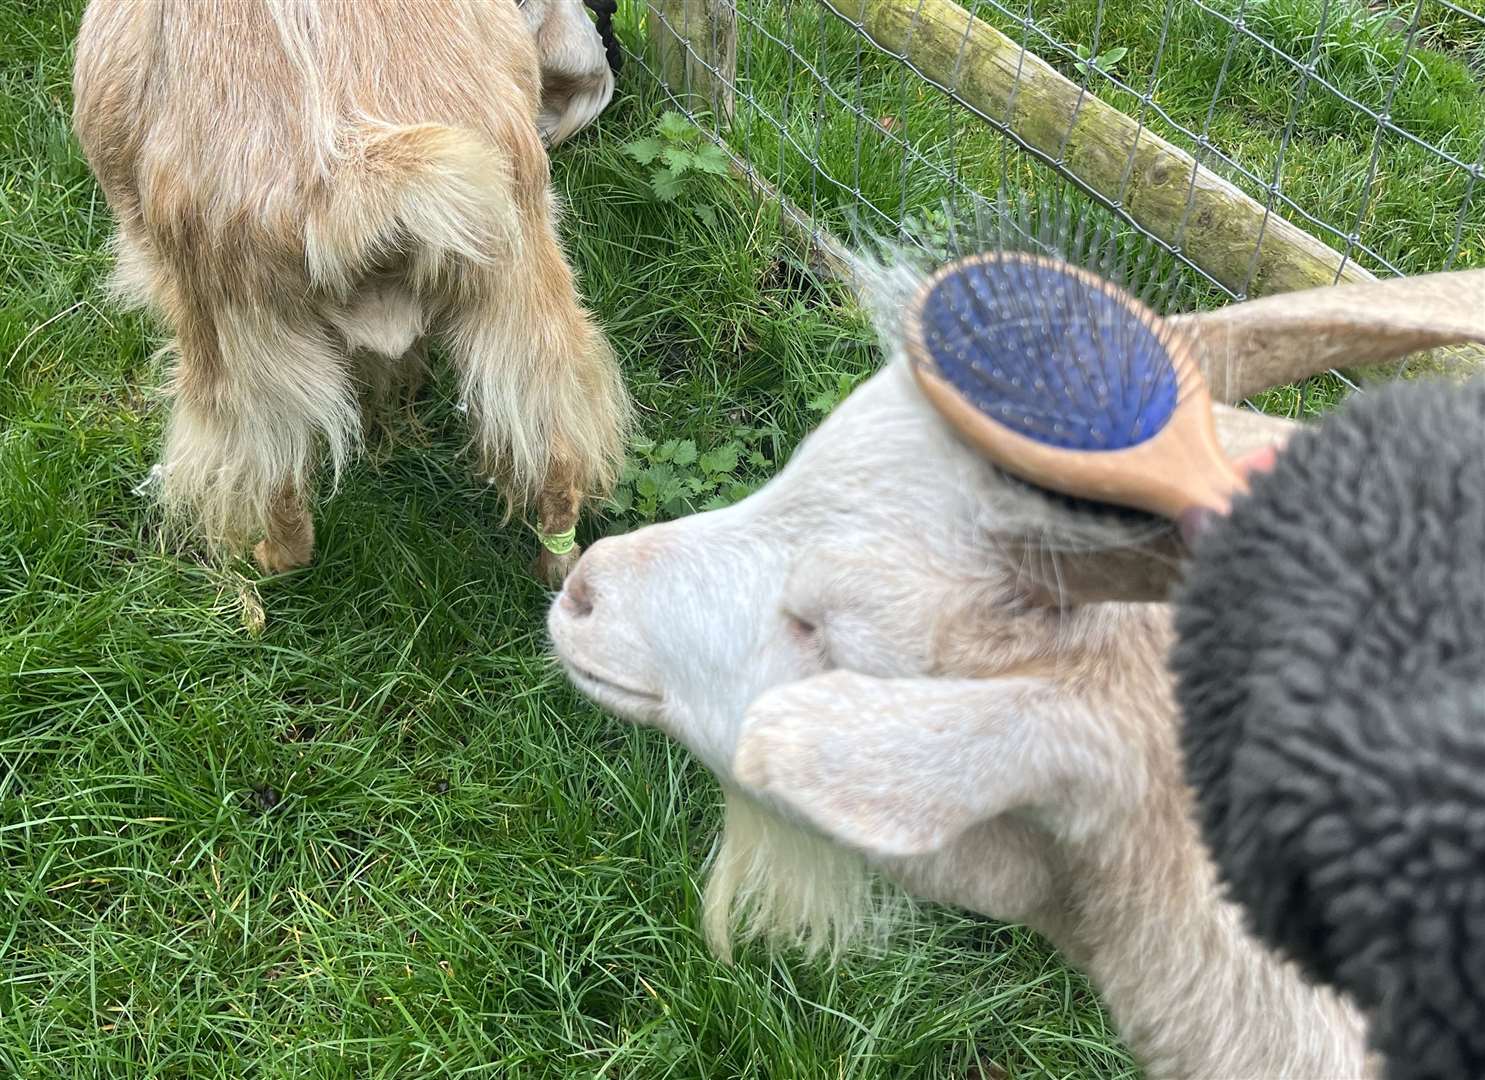 You also get the chance to brush the goats